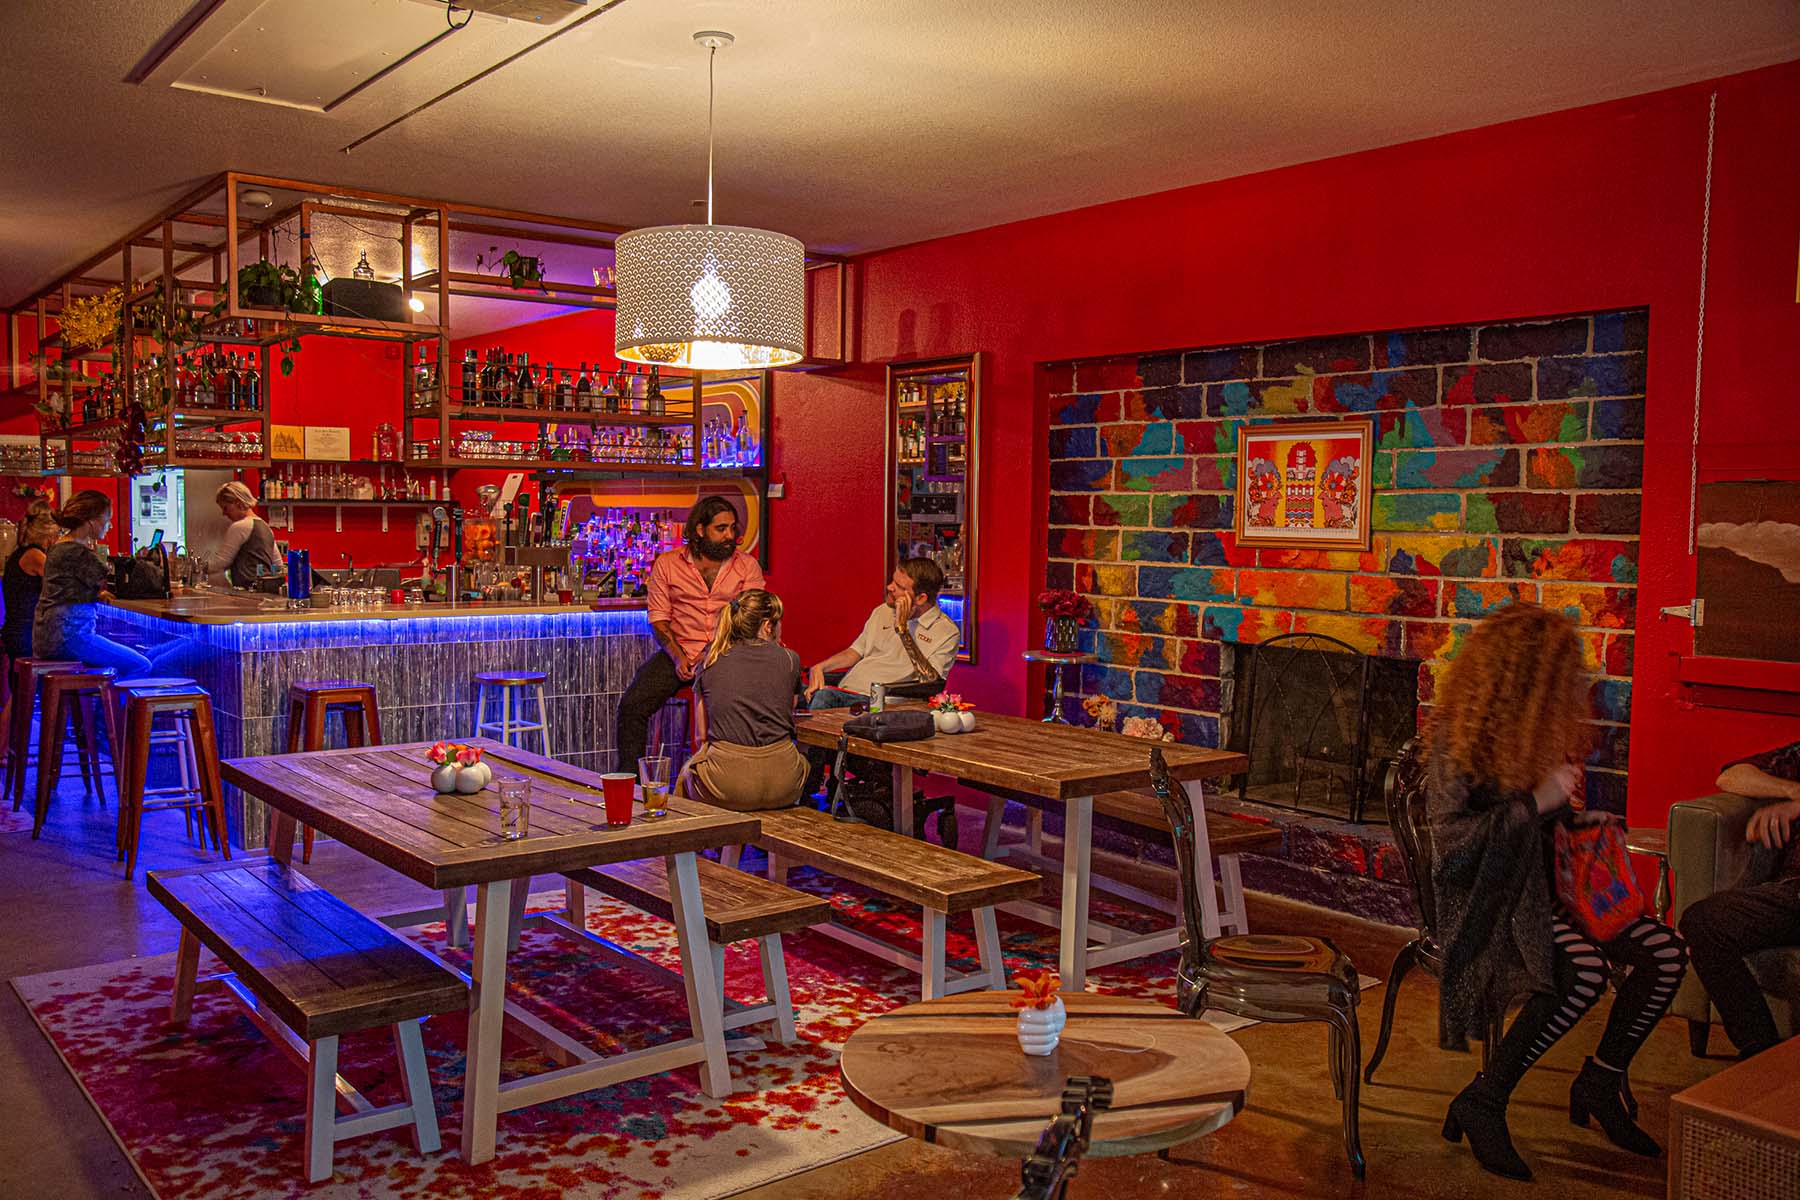 Beer garden, outside stage, eclectic interior bar - it's The Far Out on Manchaca. Photo: Will Taylor - LostinAustin.org